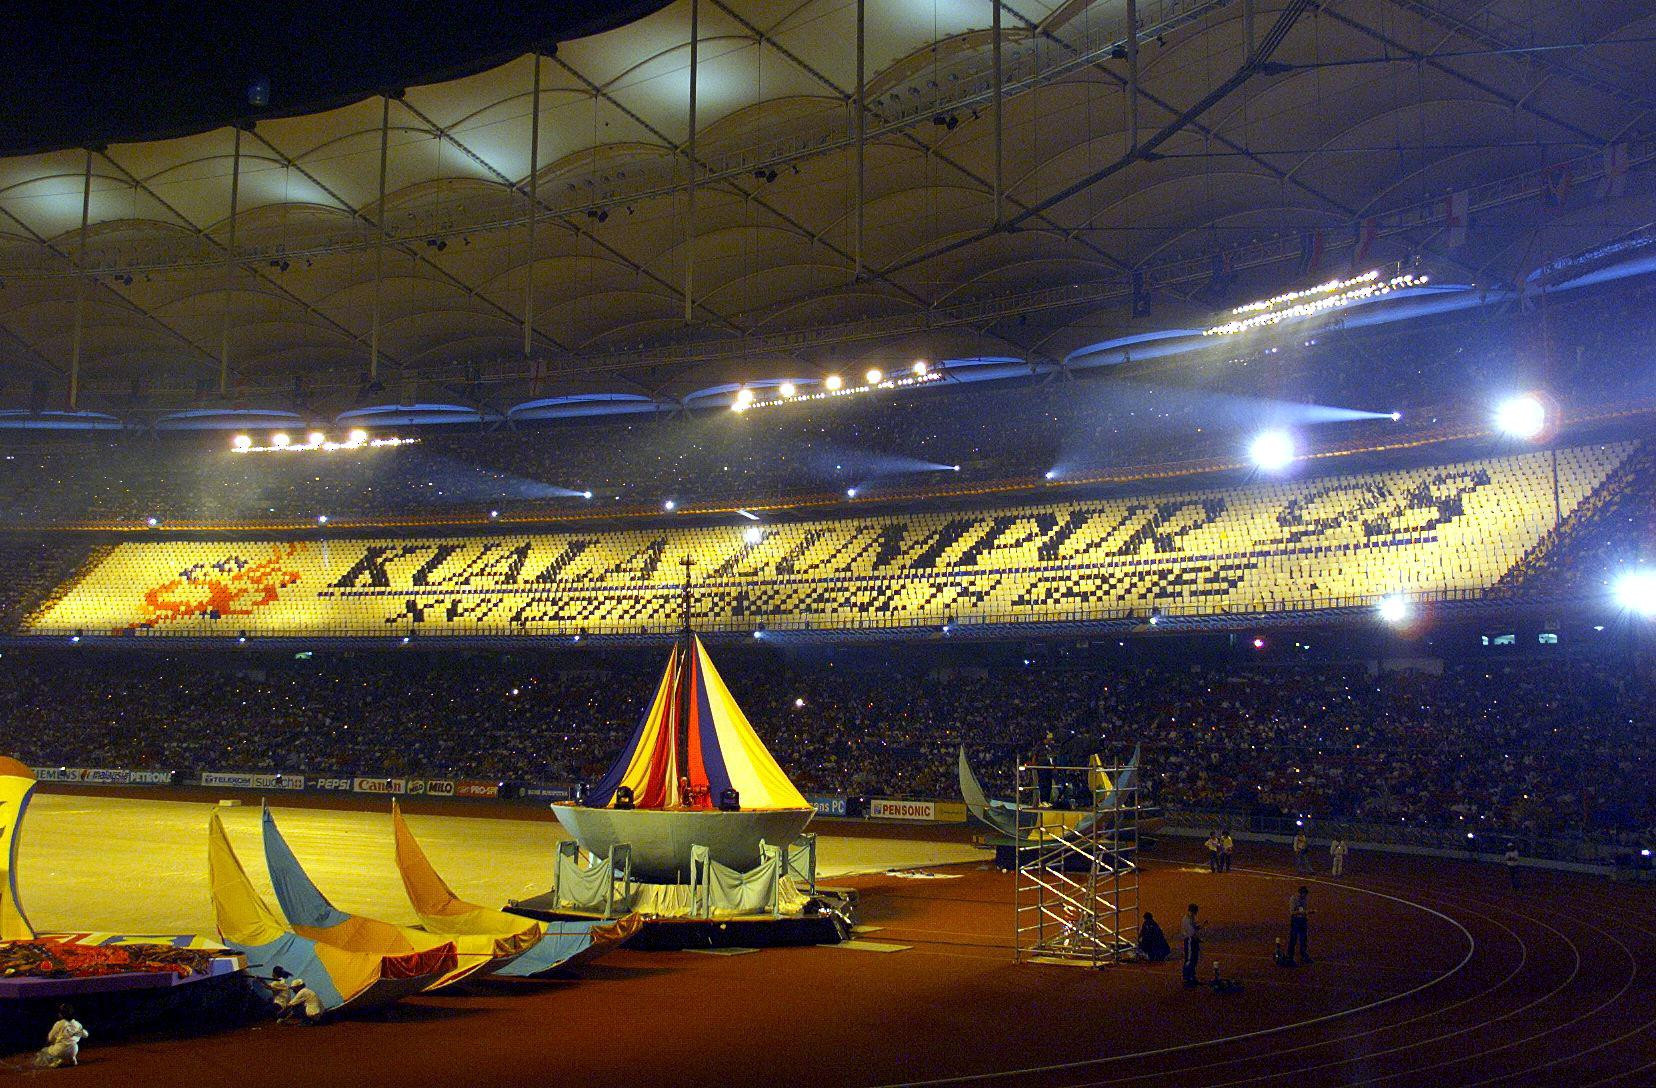 The spectacular Opening Ceremony at Kuala Lumpur 1998 was staged under the lights at the new Bukit Jalil Stadium ©Getty Images